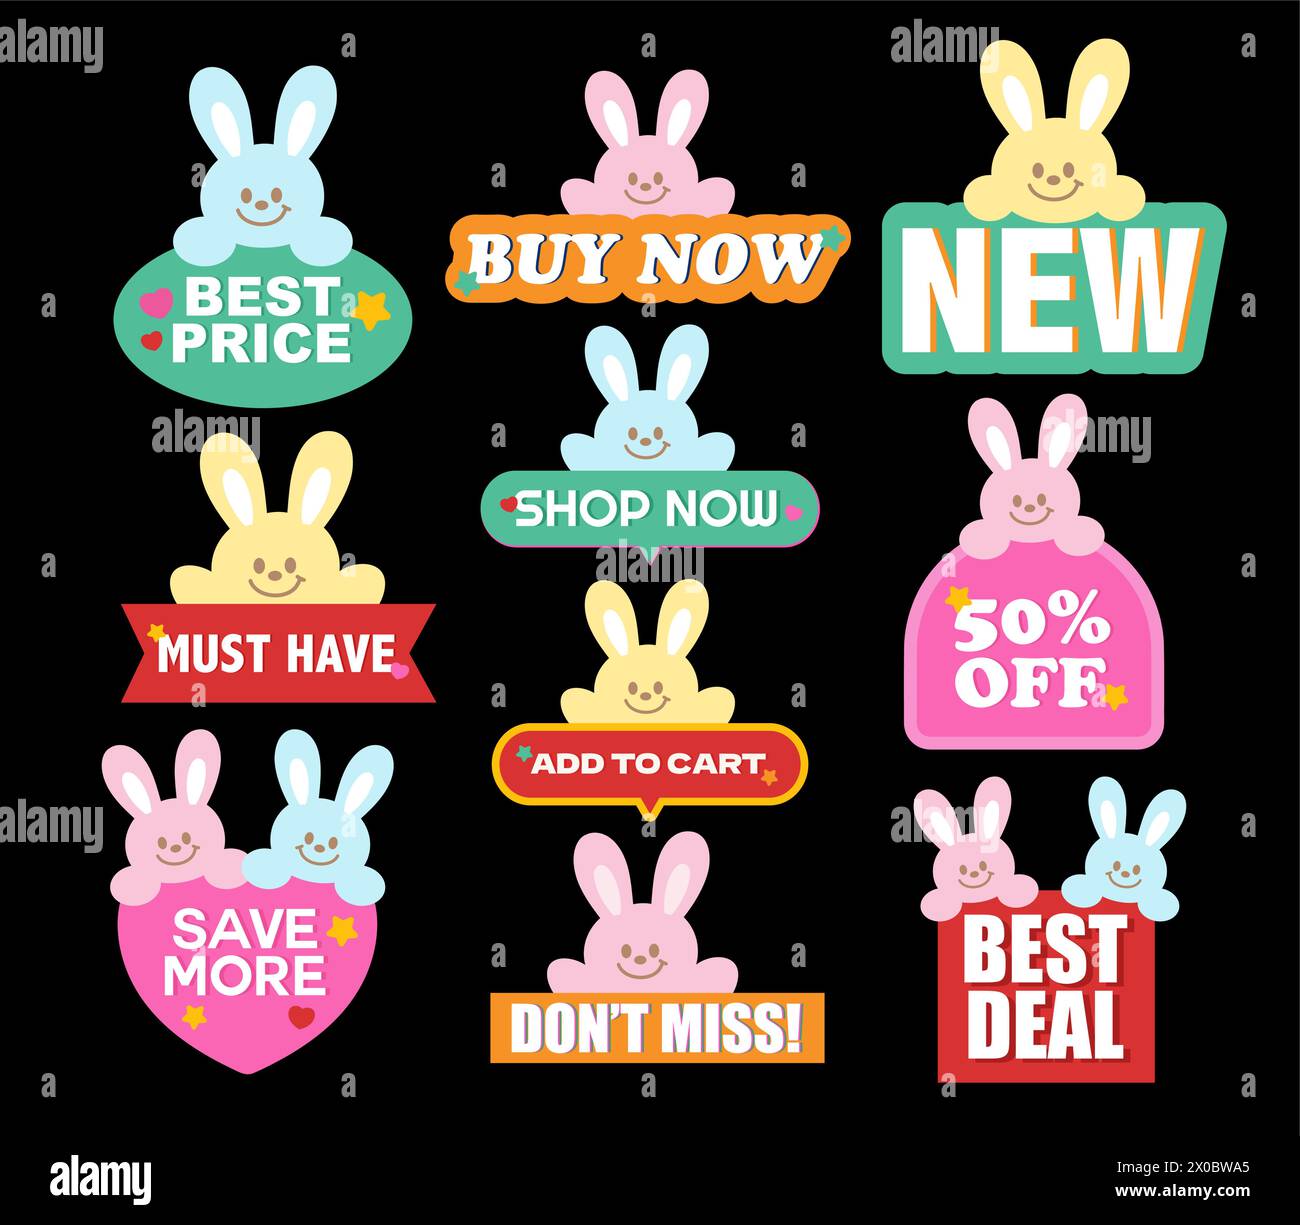 Bunny sale icons such as best price, buy now, new, must have, add to cart, 50% off for online shopping, easter promotion, card, print, discount badges Stock Vector